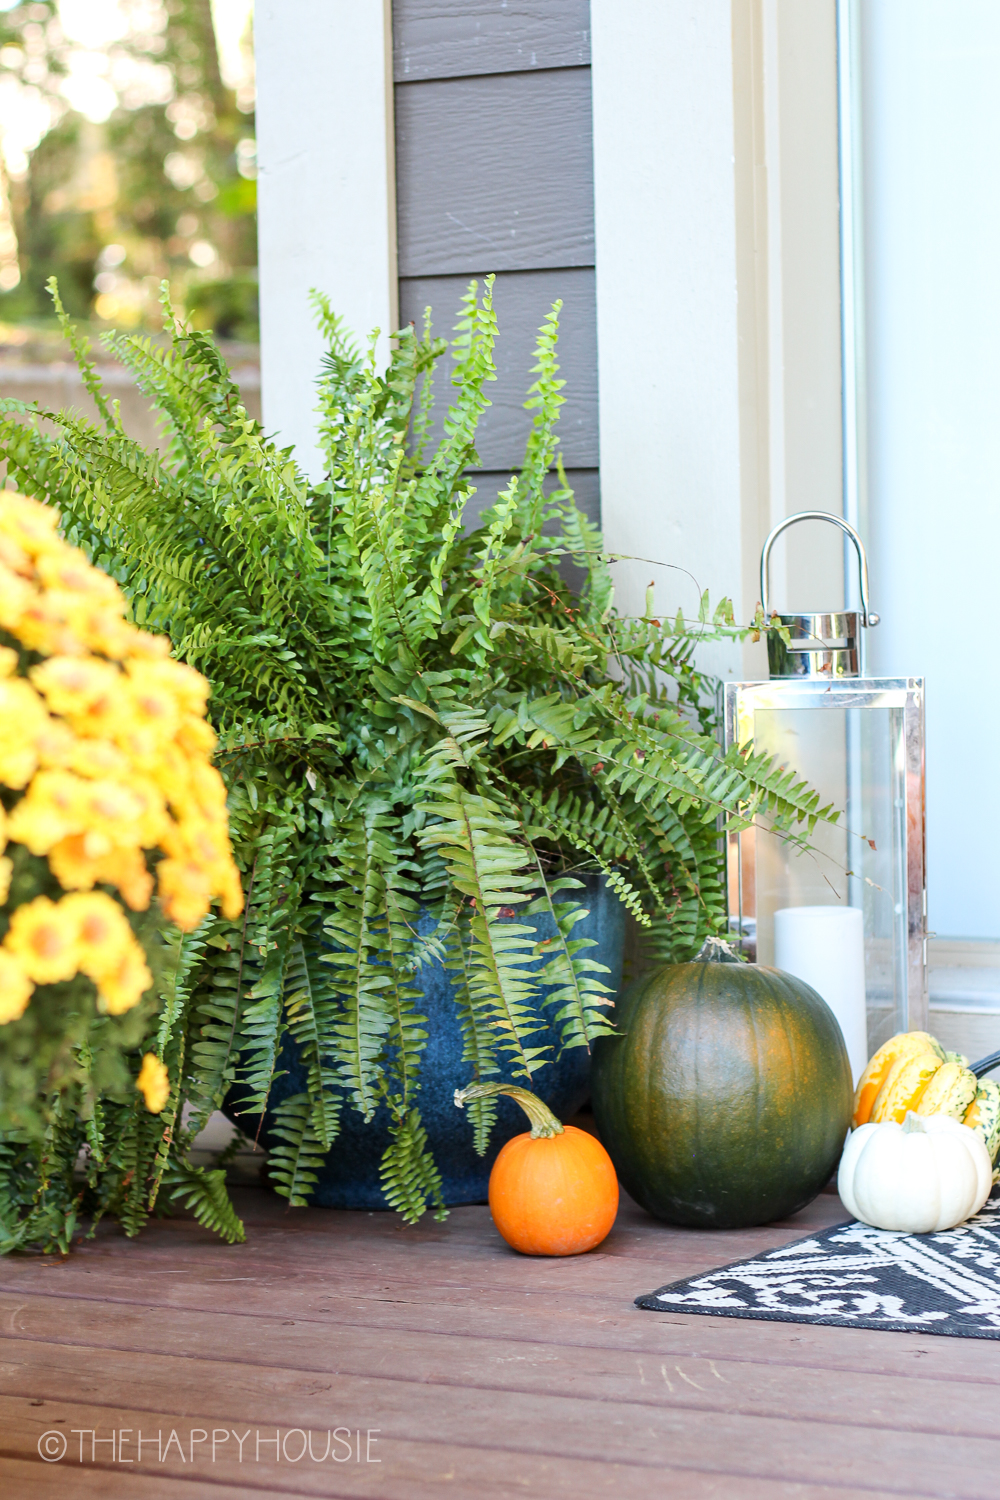 Green, orange and white pumpkins on the front porch.